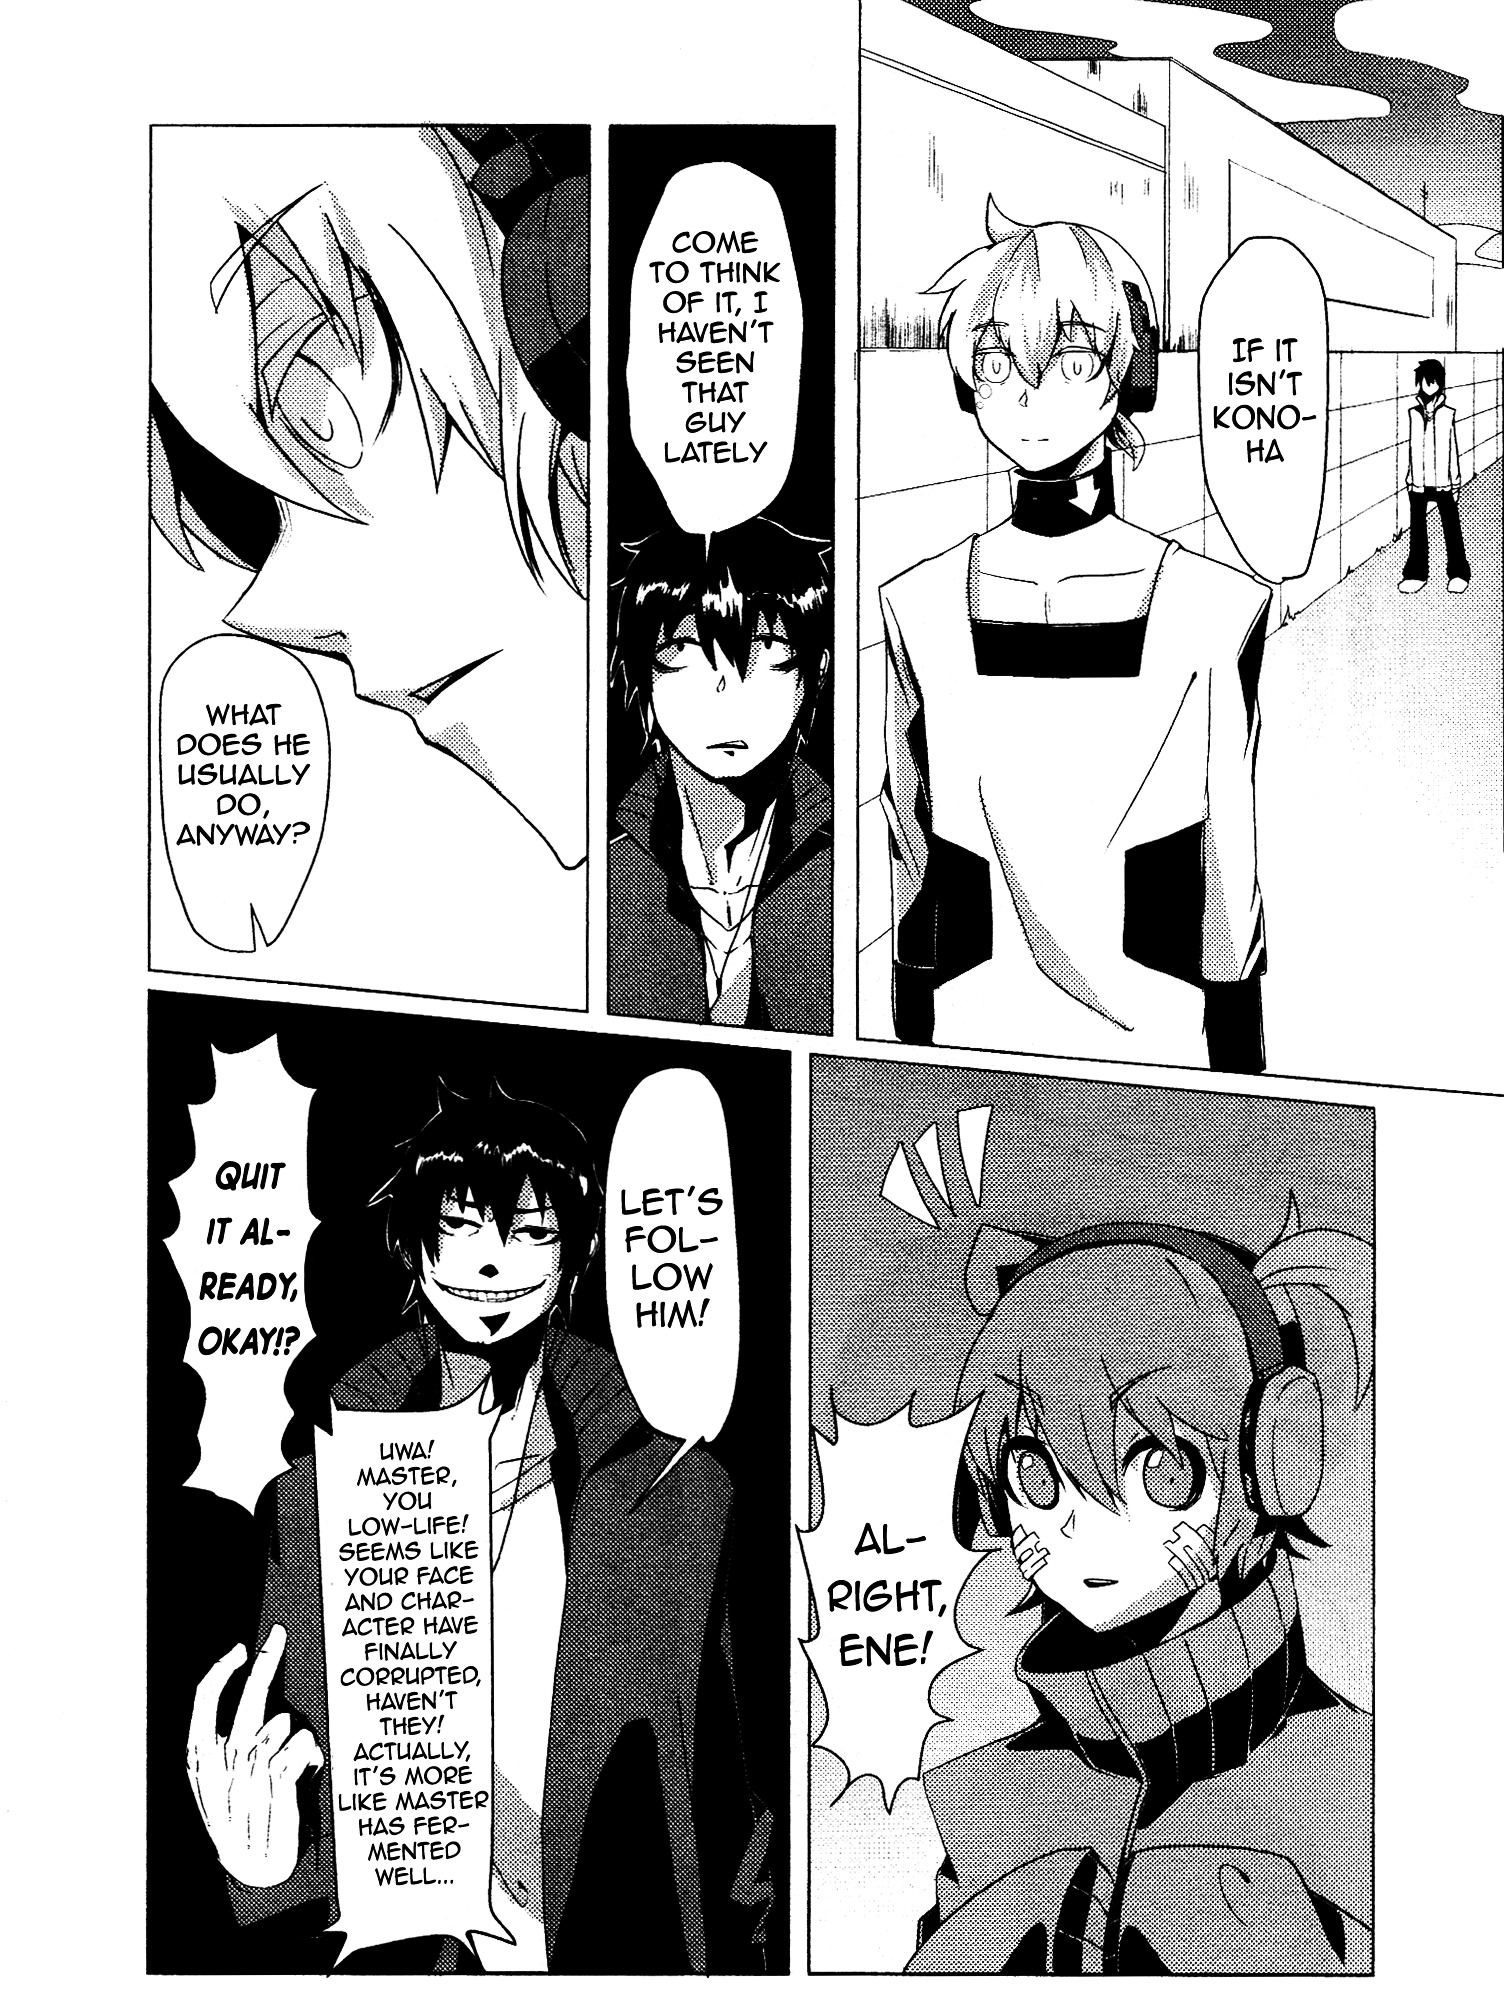 Kagerou Daze Official Anthology Comic -Summer- Vol.1 Chapter 12 : Konoha, Summer, And I (Physics) By Ryuuseee - Picture 2